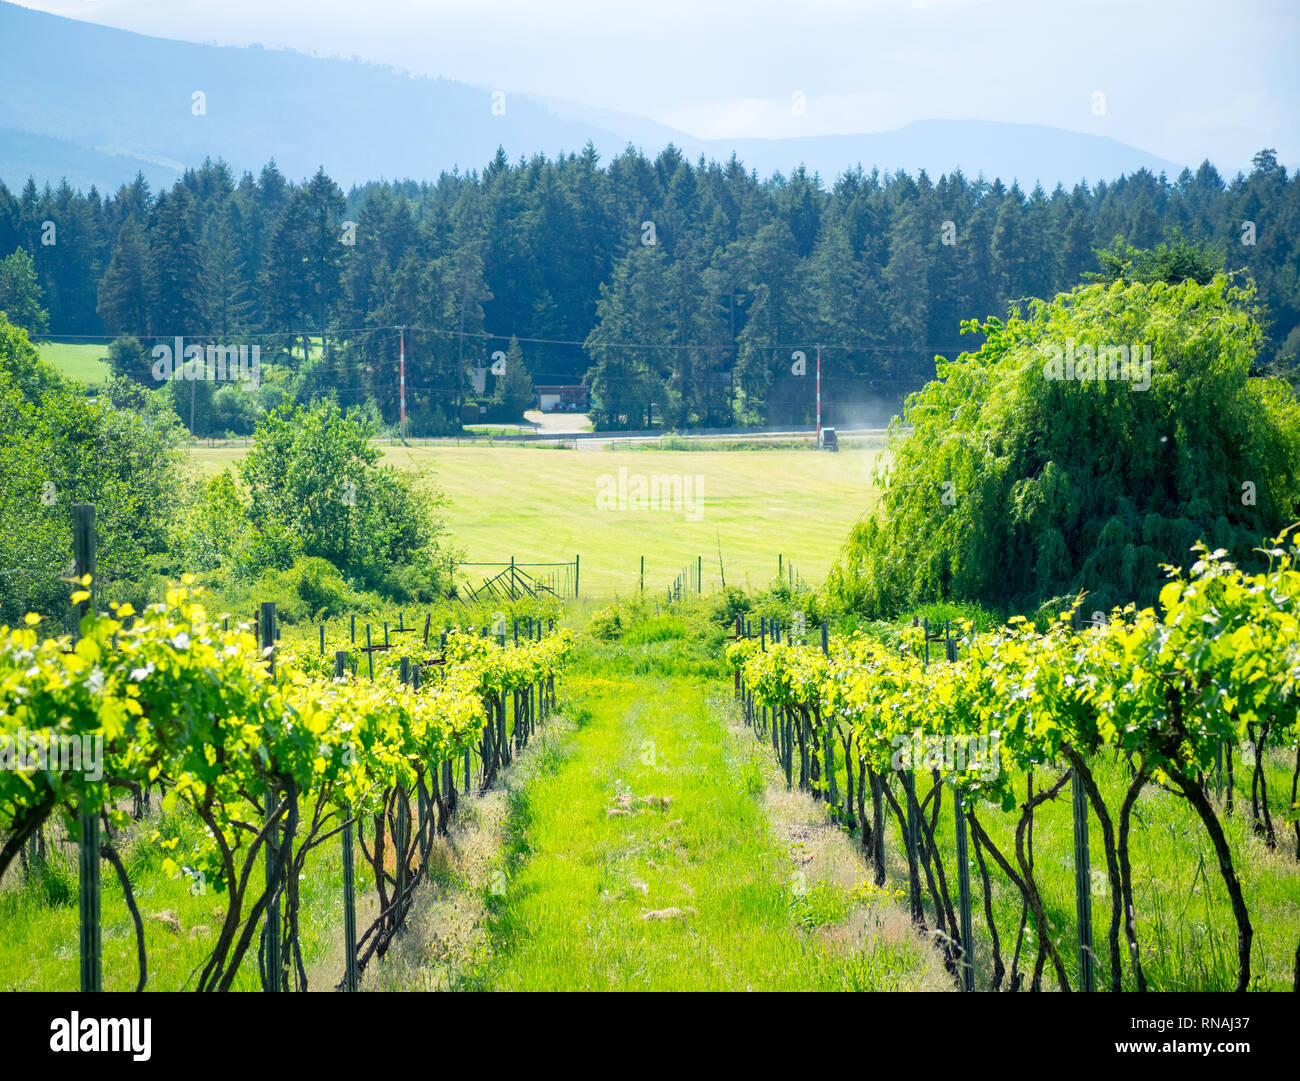 A view of the grapevines (vineyard) at the Rocky Creek Winery in Cowichan Bay, Cowichan Valley, Vancouver Island, British Columbia, Canada. Stock Photo